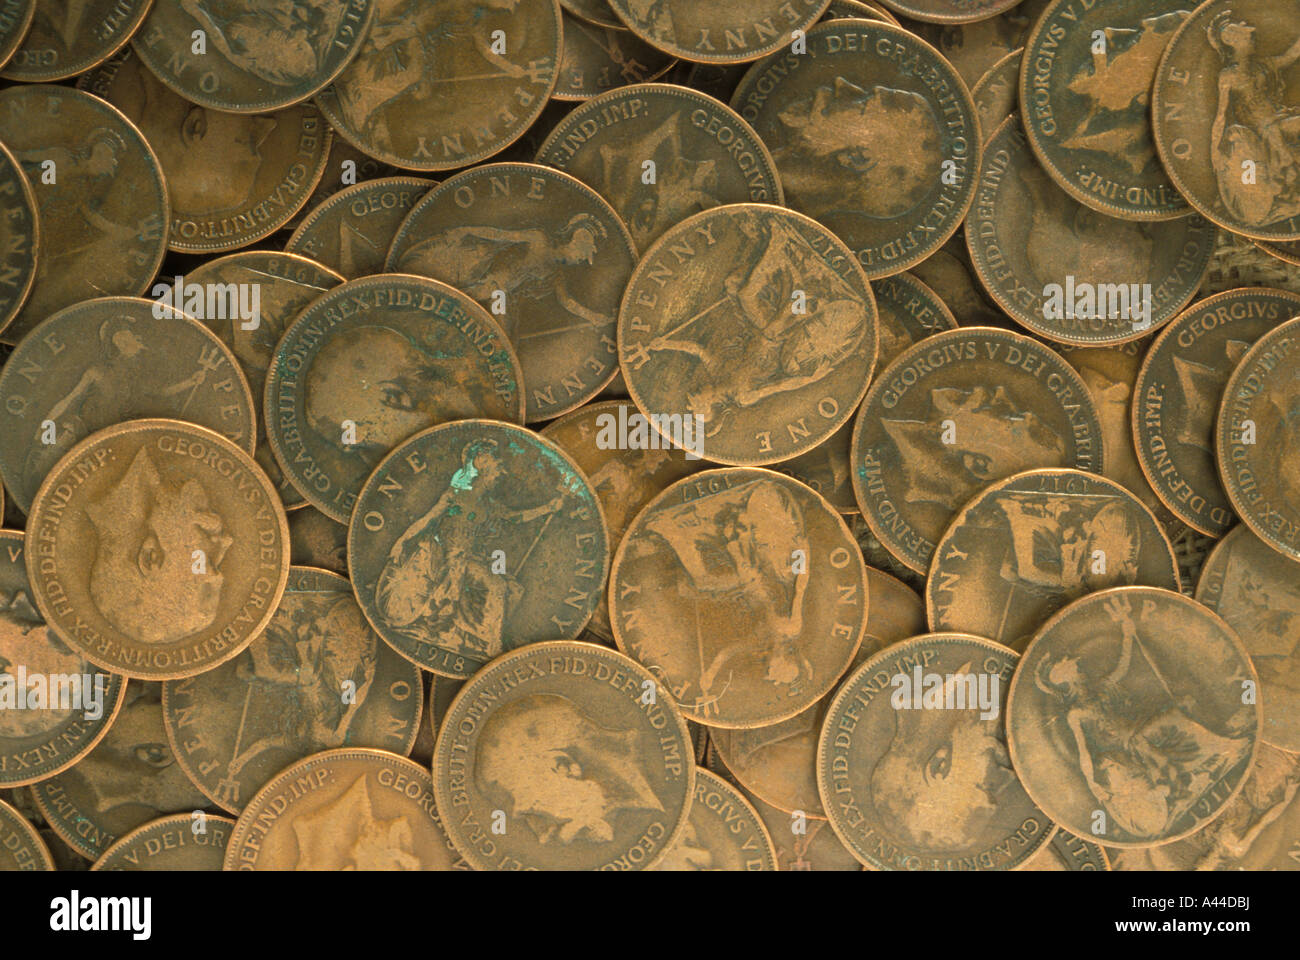 Old British coins pennies money Stock Photo